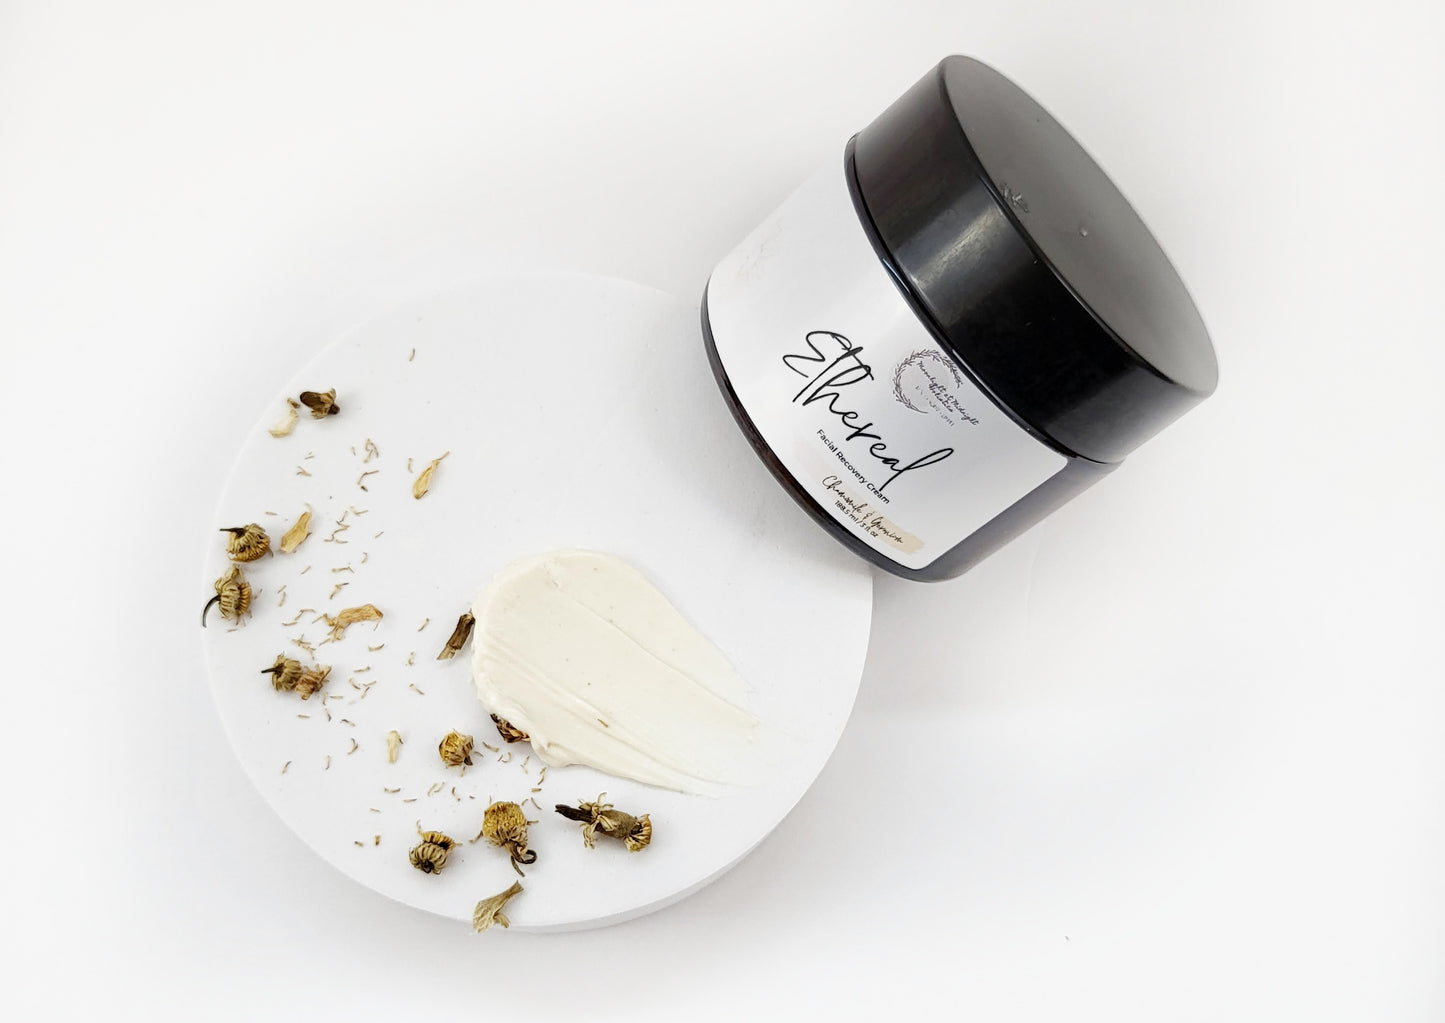 ETHEREAL Facial Recovery Cream | Made with Organic: Hemp Seed Oil, Sunflower Oil, Aloe Vera | Chamomile & Geranium |  Nightly Facial Mask